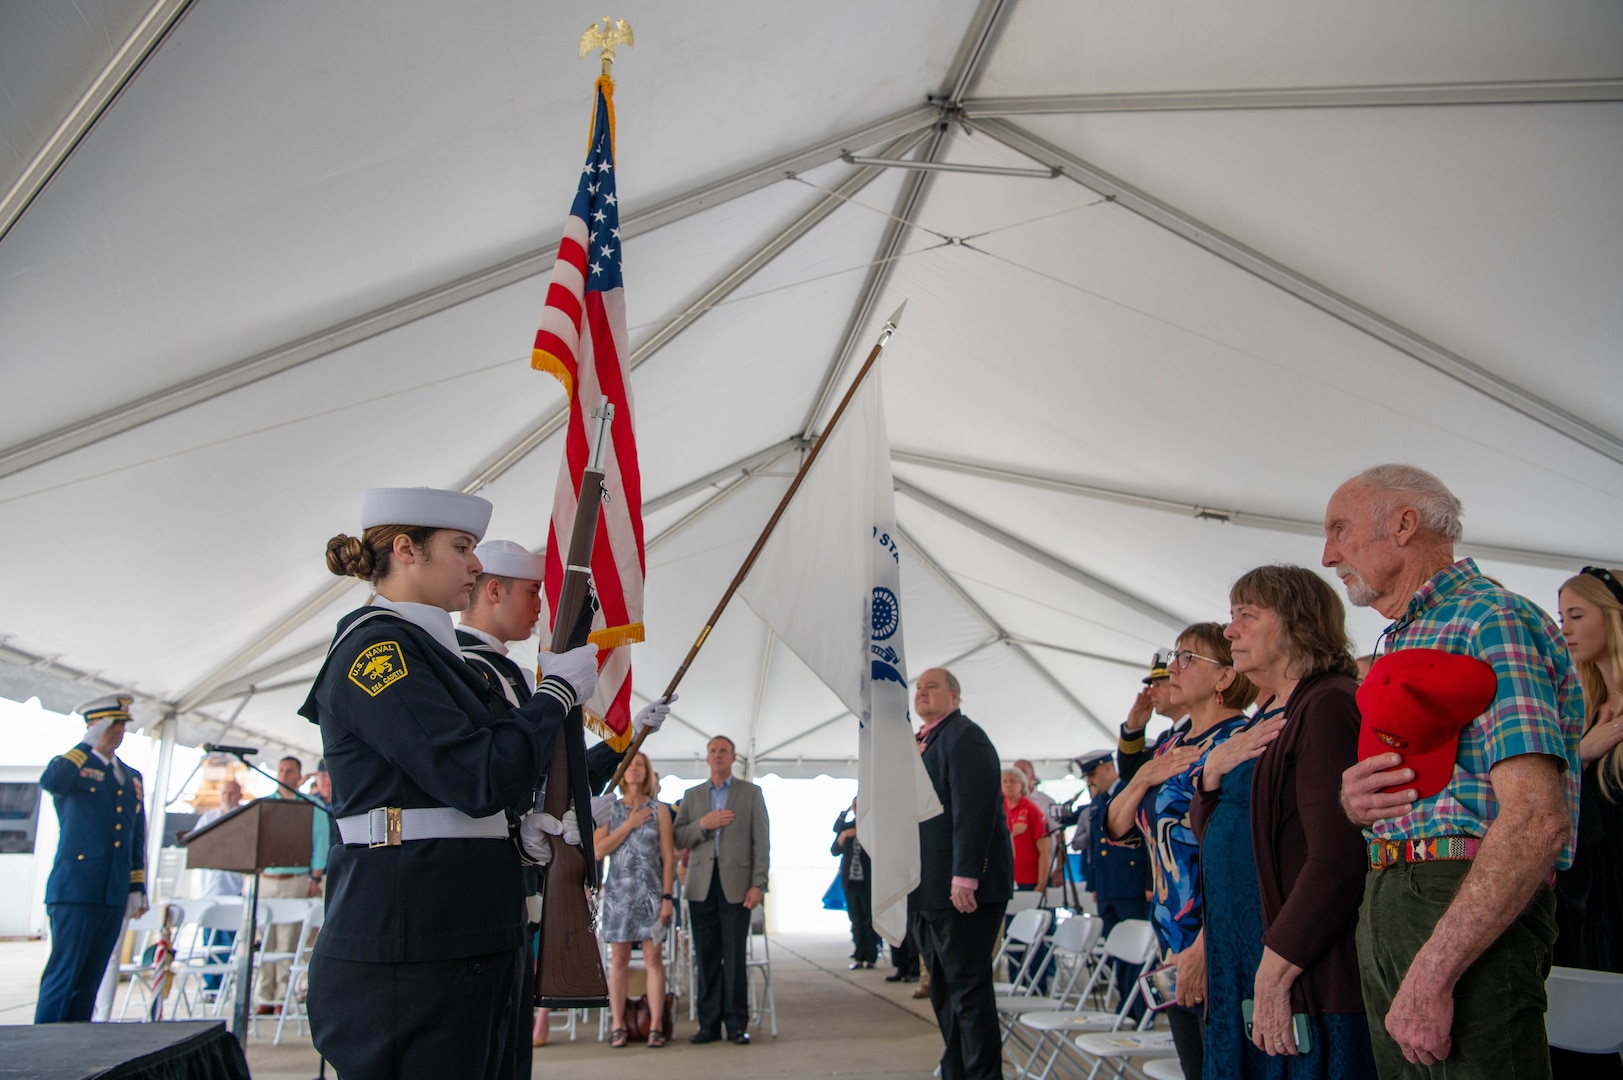 Members of the U.S. Naval Sea Cadets ceremonial honor guard present the colors to begin the Coast Guard Cutter Decisive’s decommissioning ceremony in Pensacola, Florida, March 2, 2023. During the ceremony, the Coast Guard retired Decisive after its 55 years of dedicated service. (U.S. Coast Guard photo by Petty Officer 2nd Class Jose Hernandez)